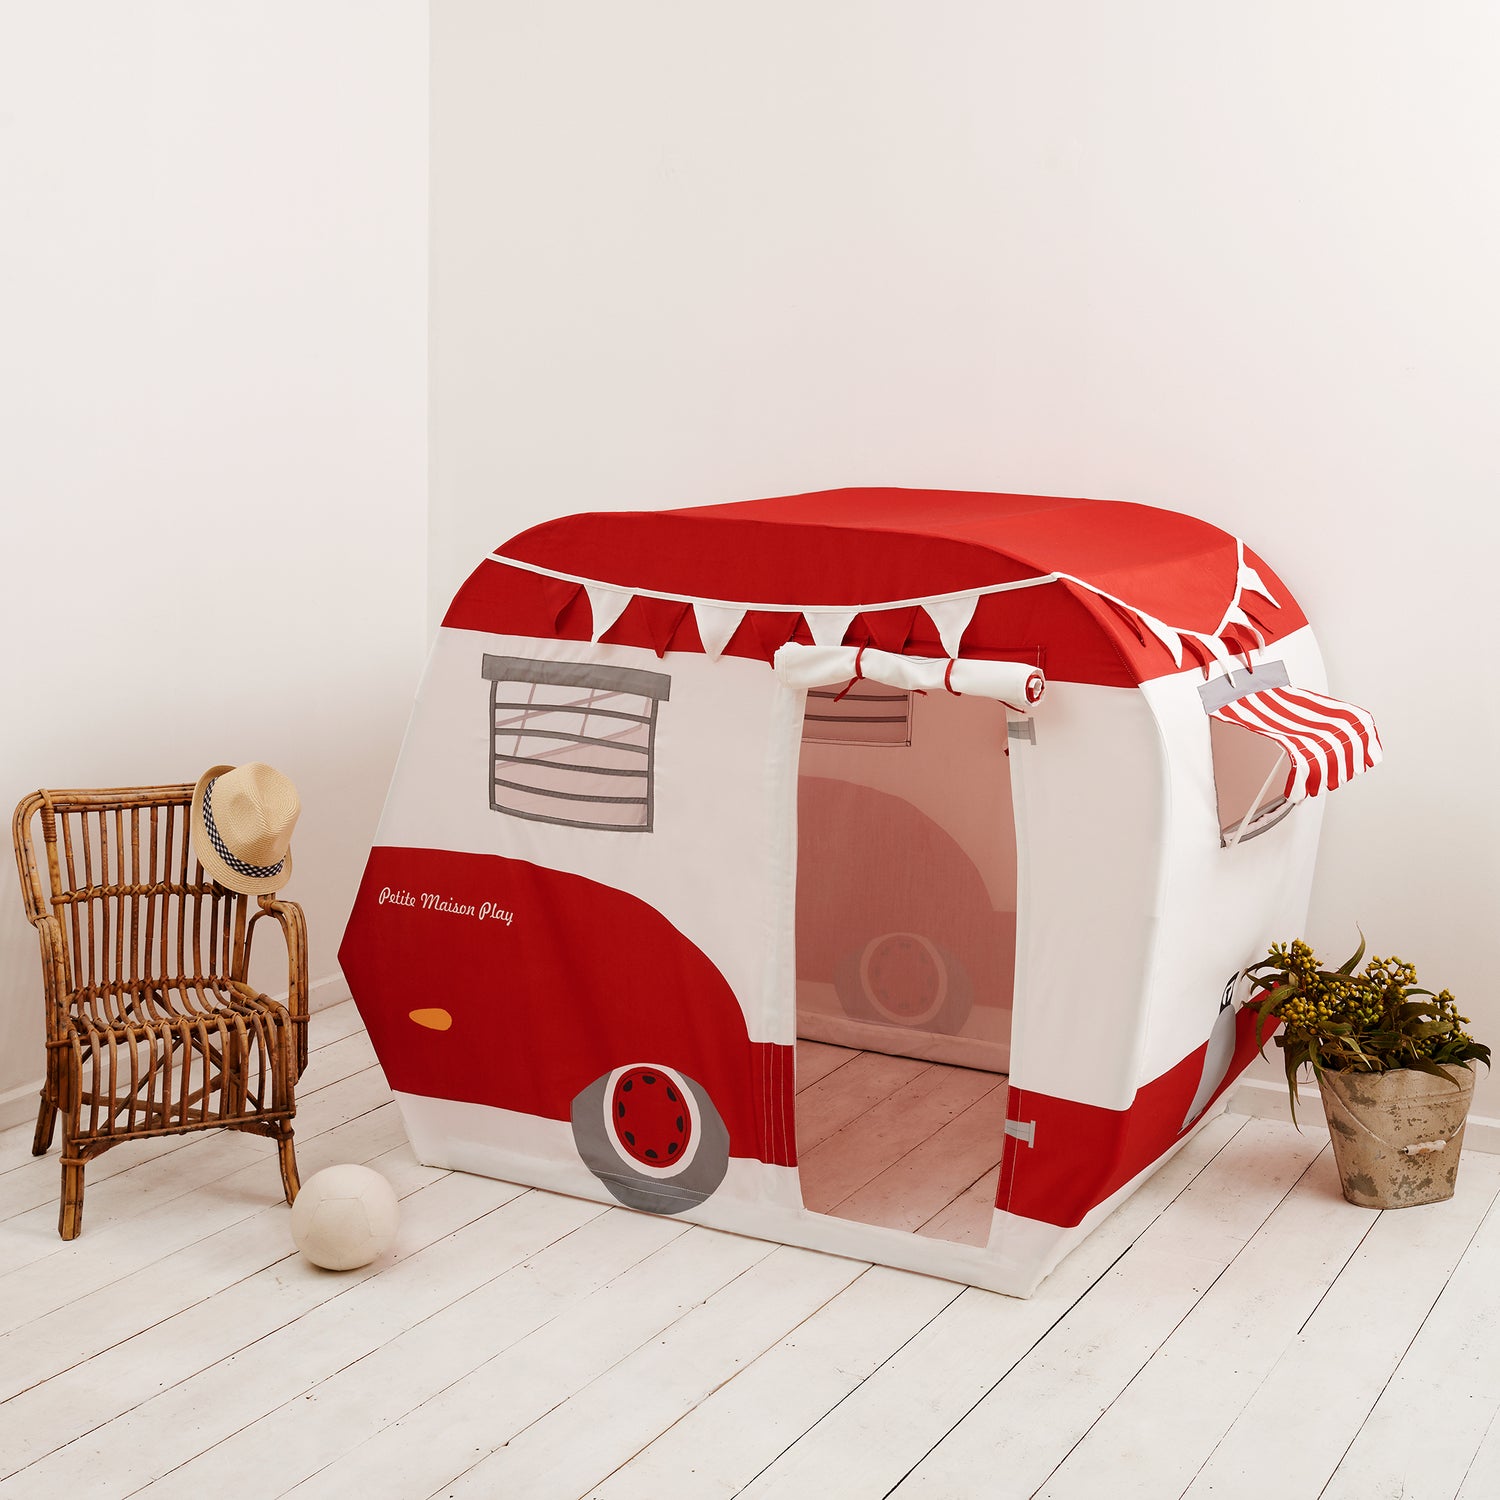 Petite Maison Play Vintage Red camper cubby